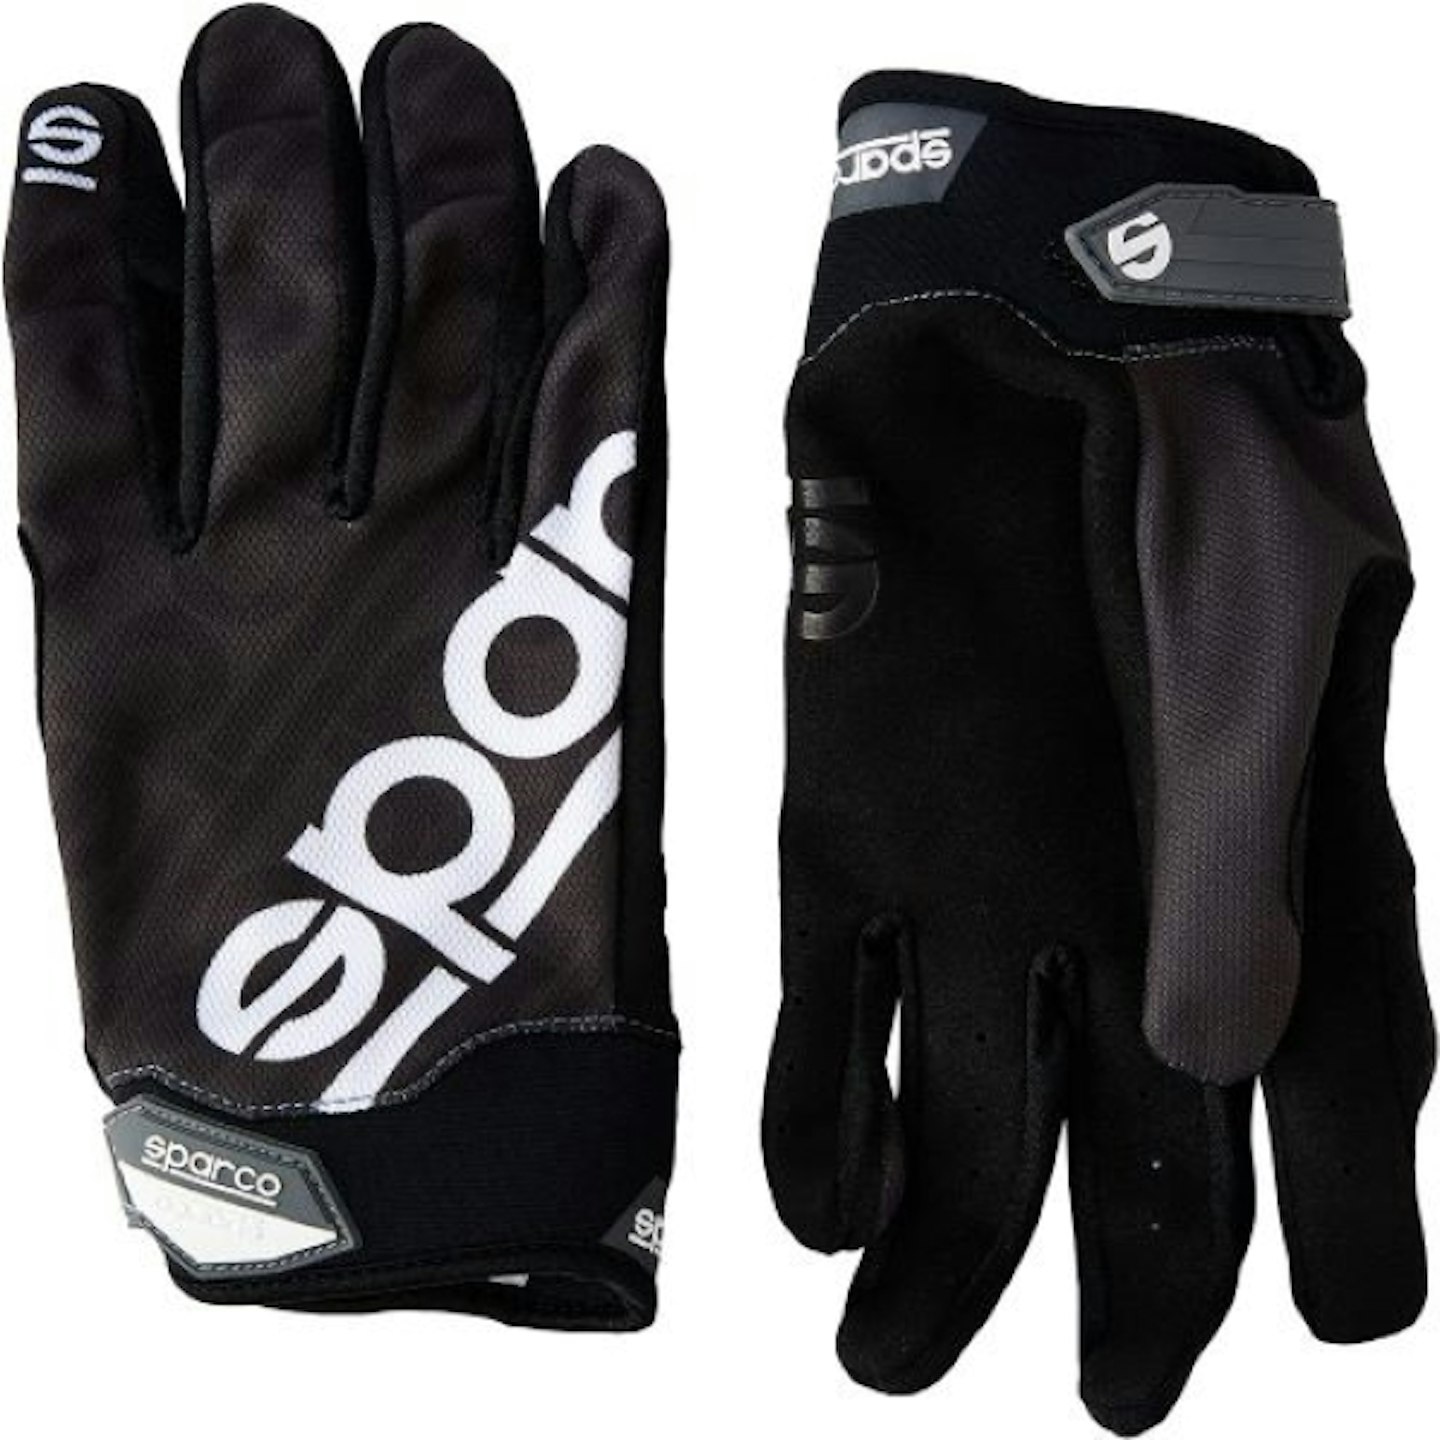 https://images.bauerhosting.com/legacy/media/6233/6c20/a4bf/4956/4410/7a69/Sparco%20Gloves.jpg?auto=format&w=1440&q=80